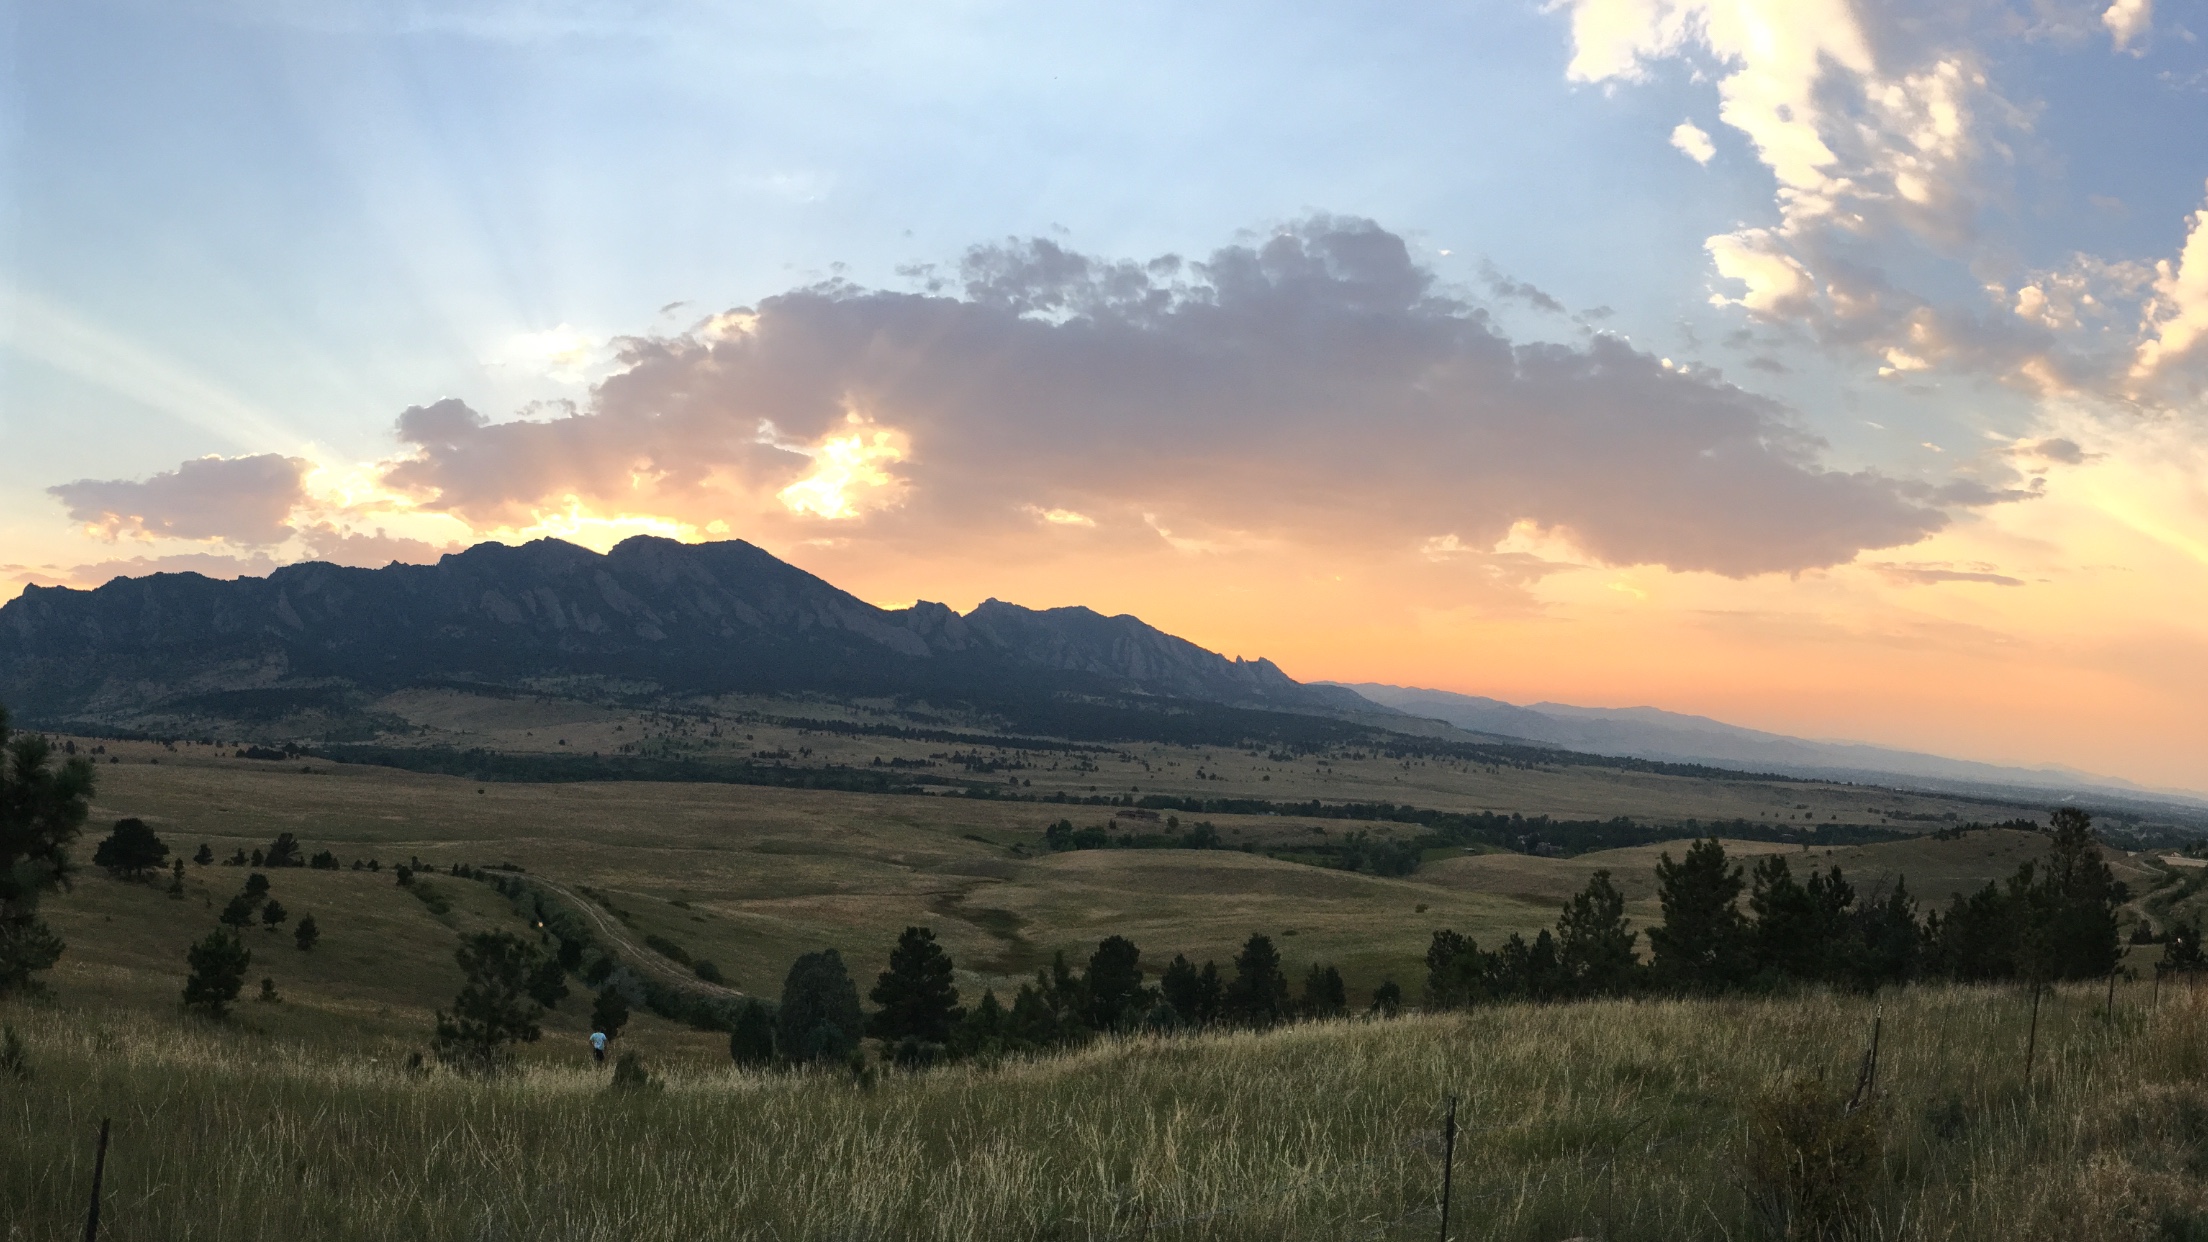 Exploring the West: open spaces and open skies …